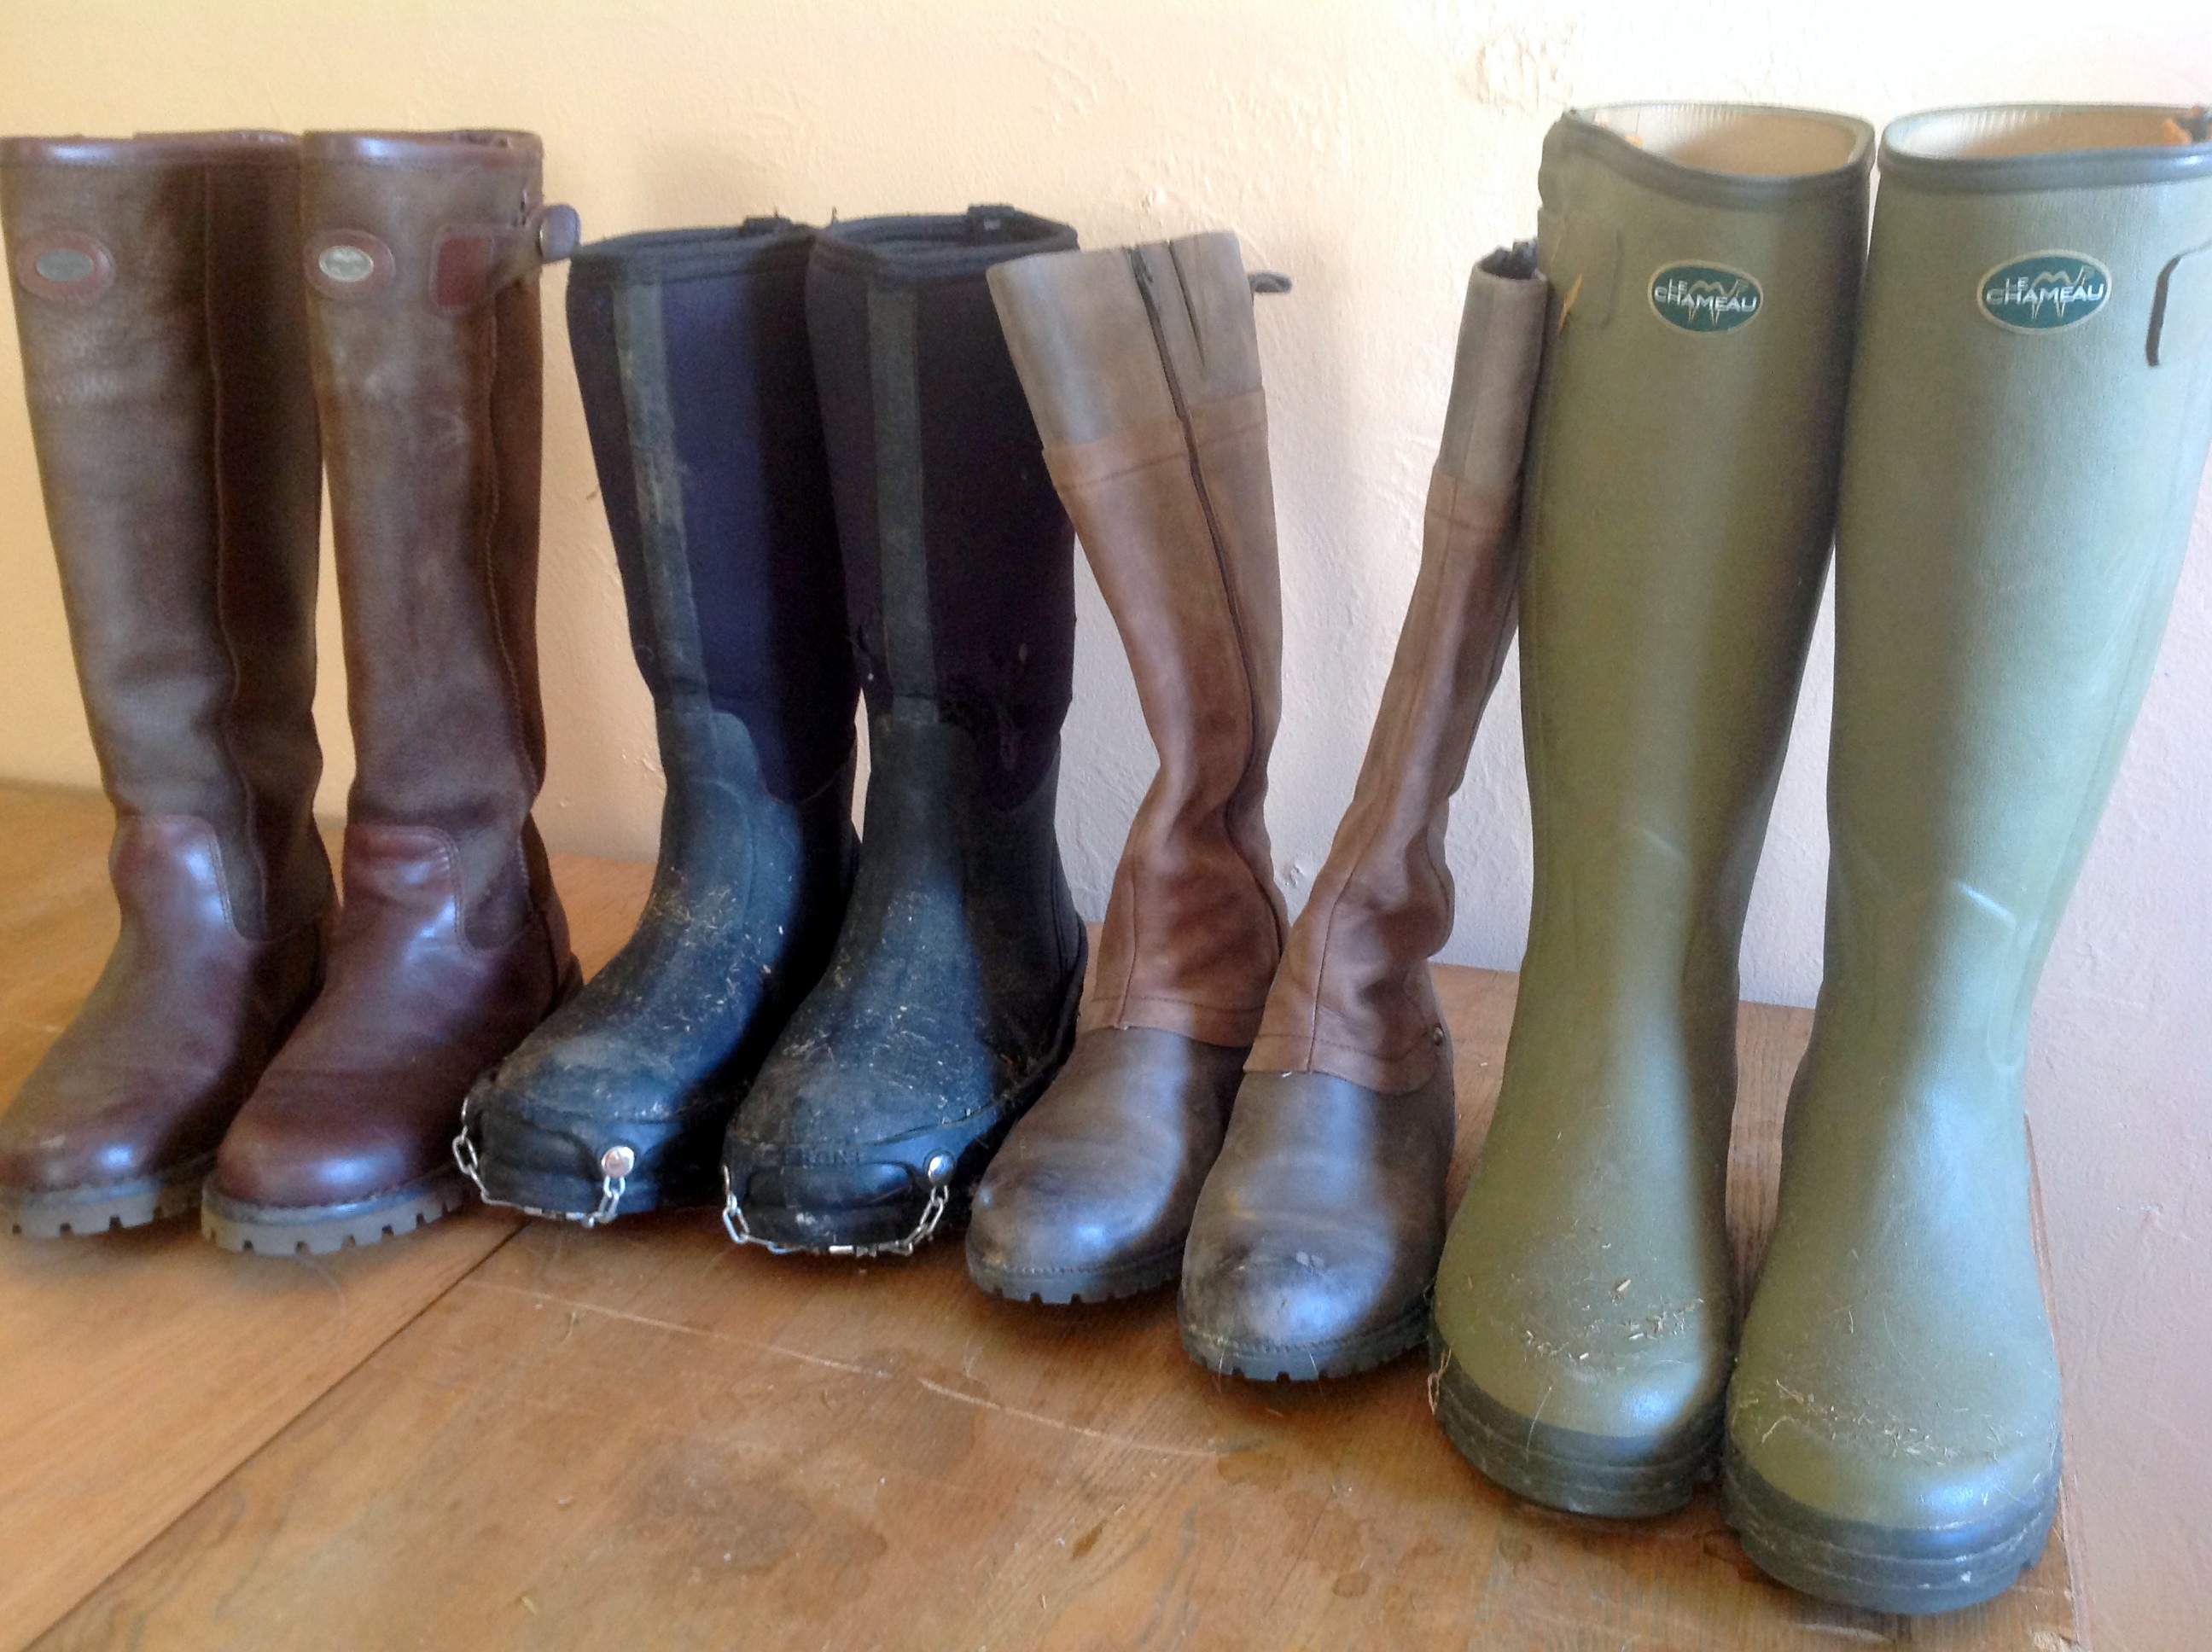 My collection of favorite upland hunting boots